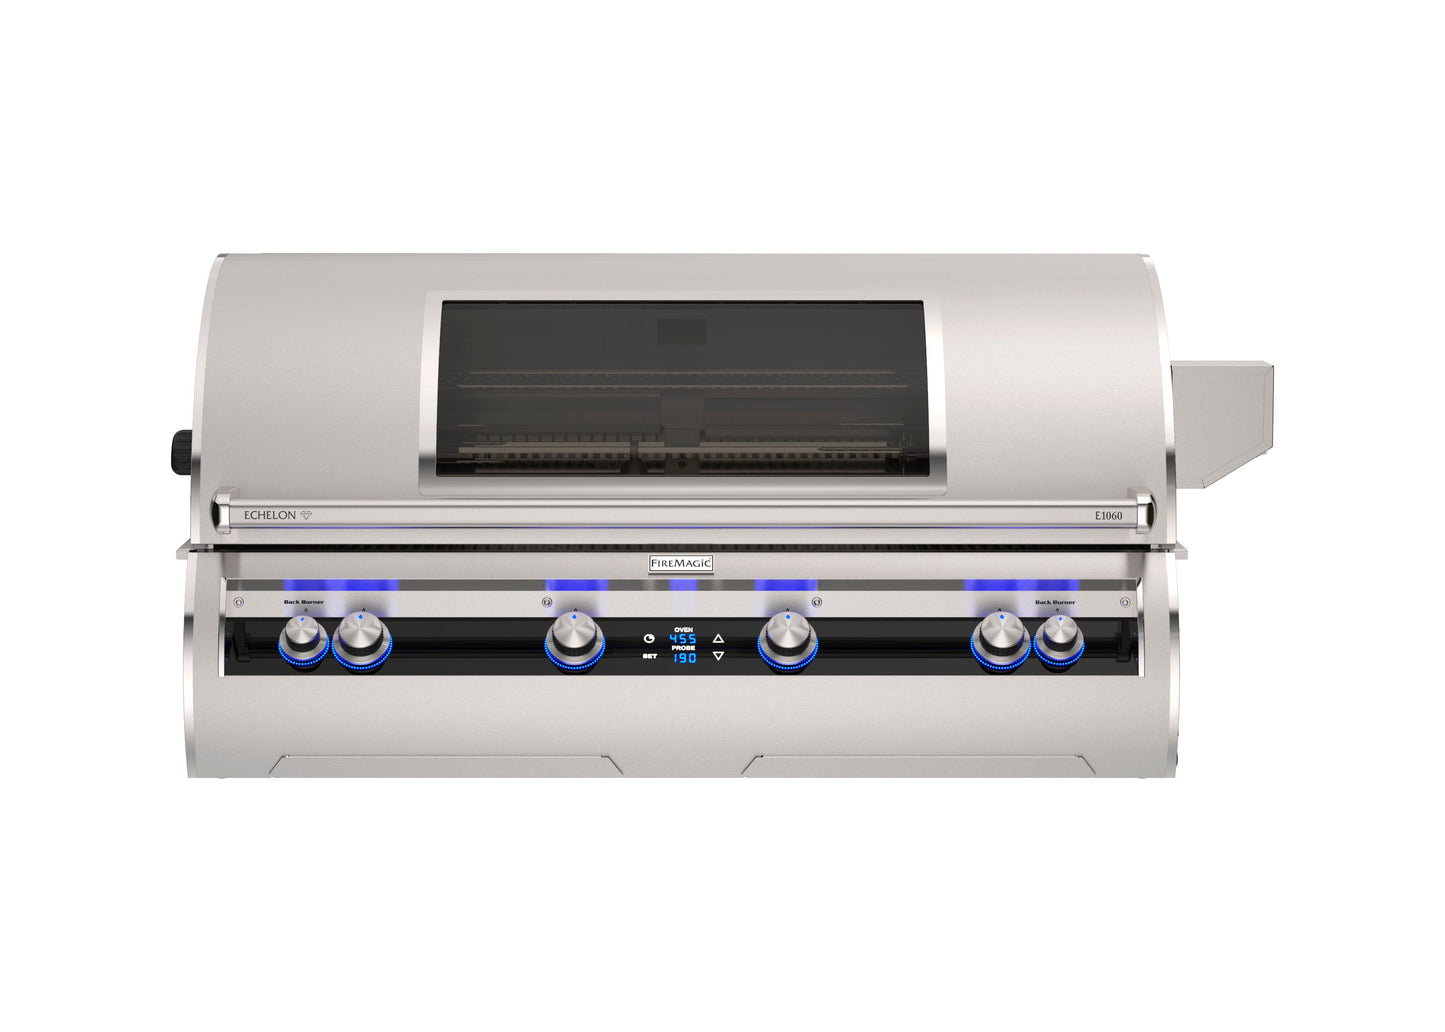 Firemagic 48 Inch Echelon Series Built-In Grill with Digital Thermometer - E1060i-9E1N